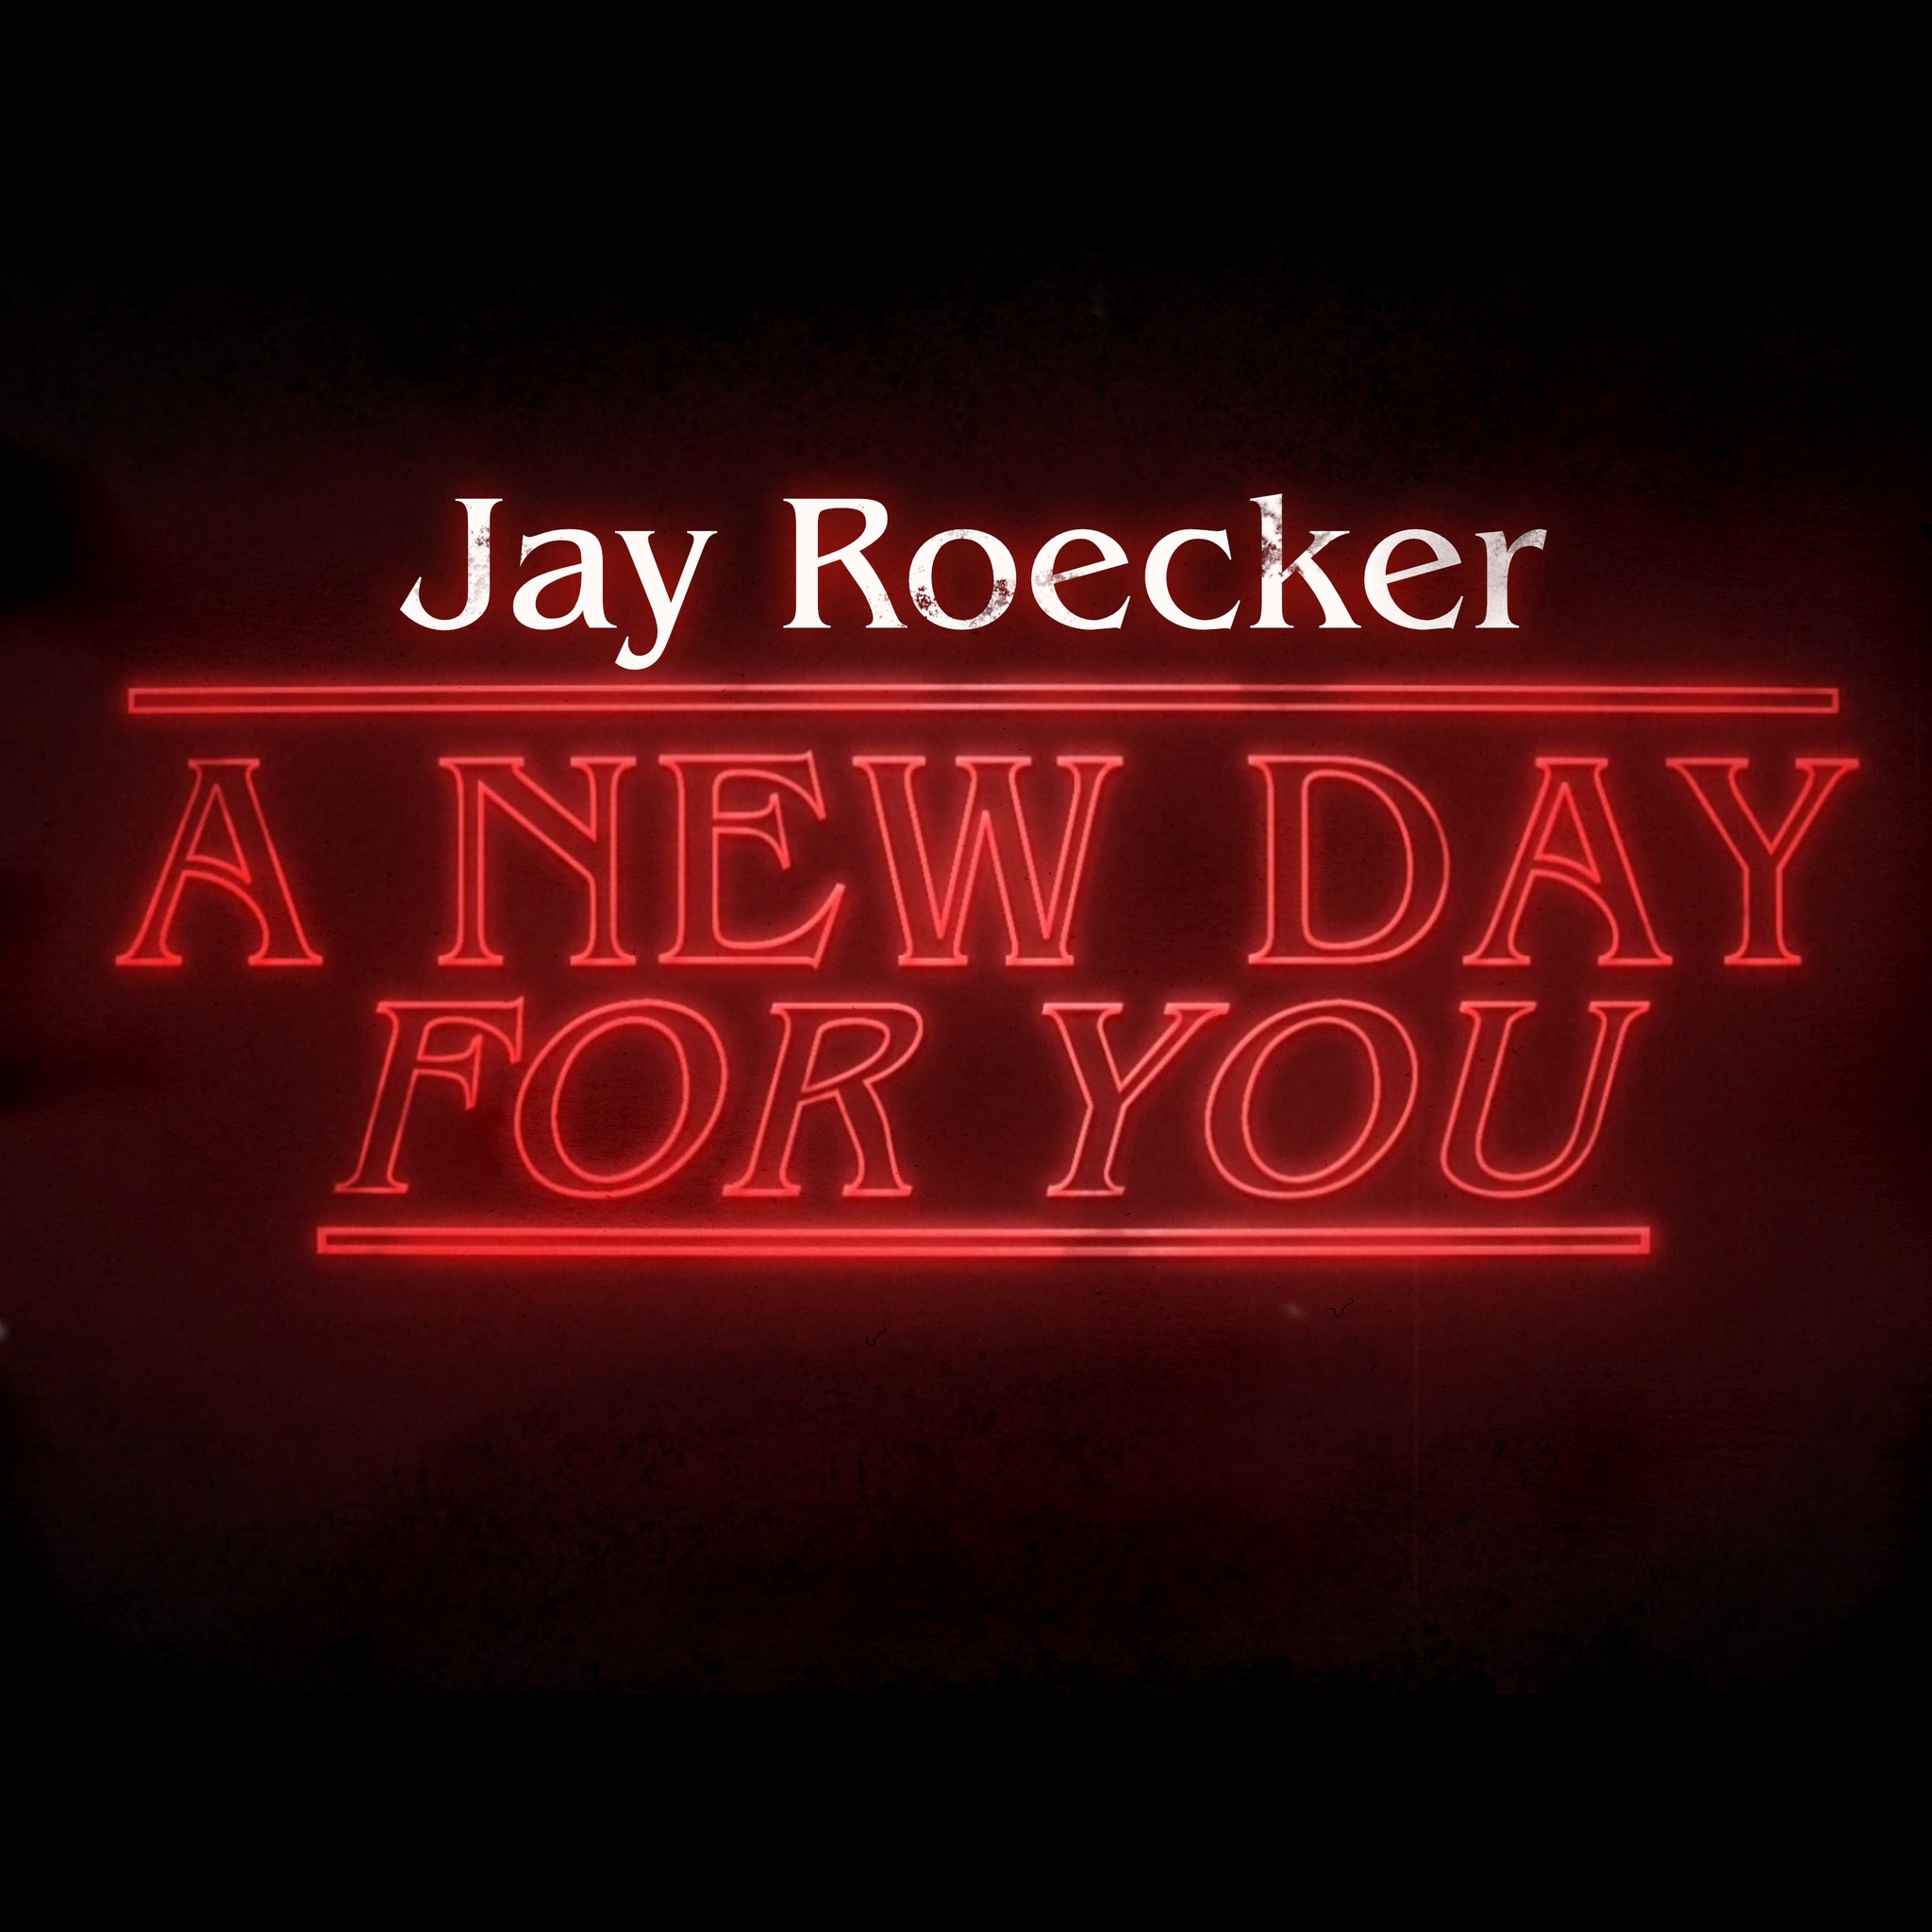 jay-roecker-a-new-day-for-you